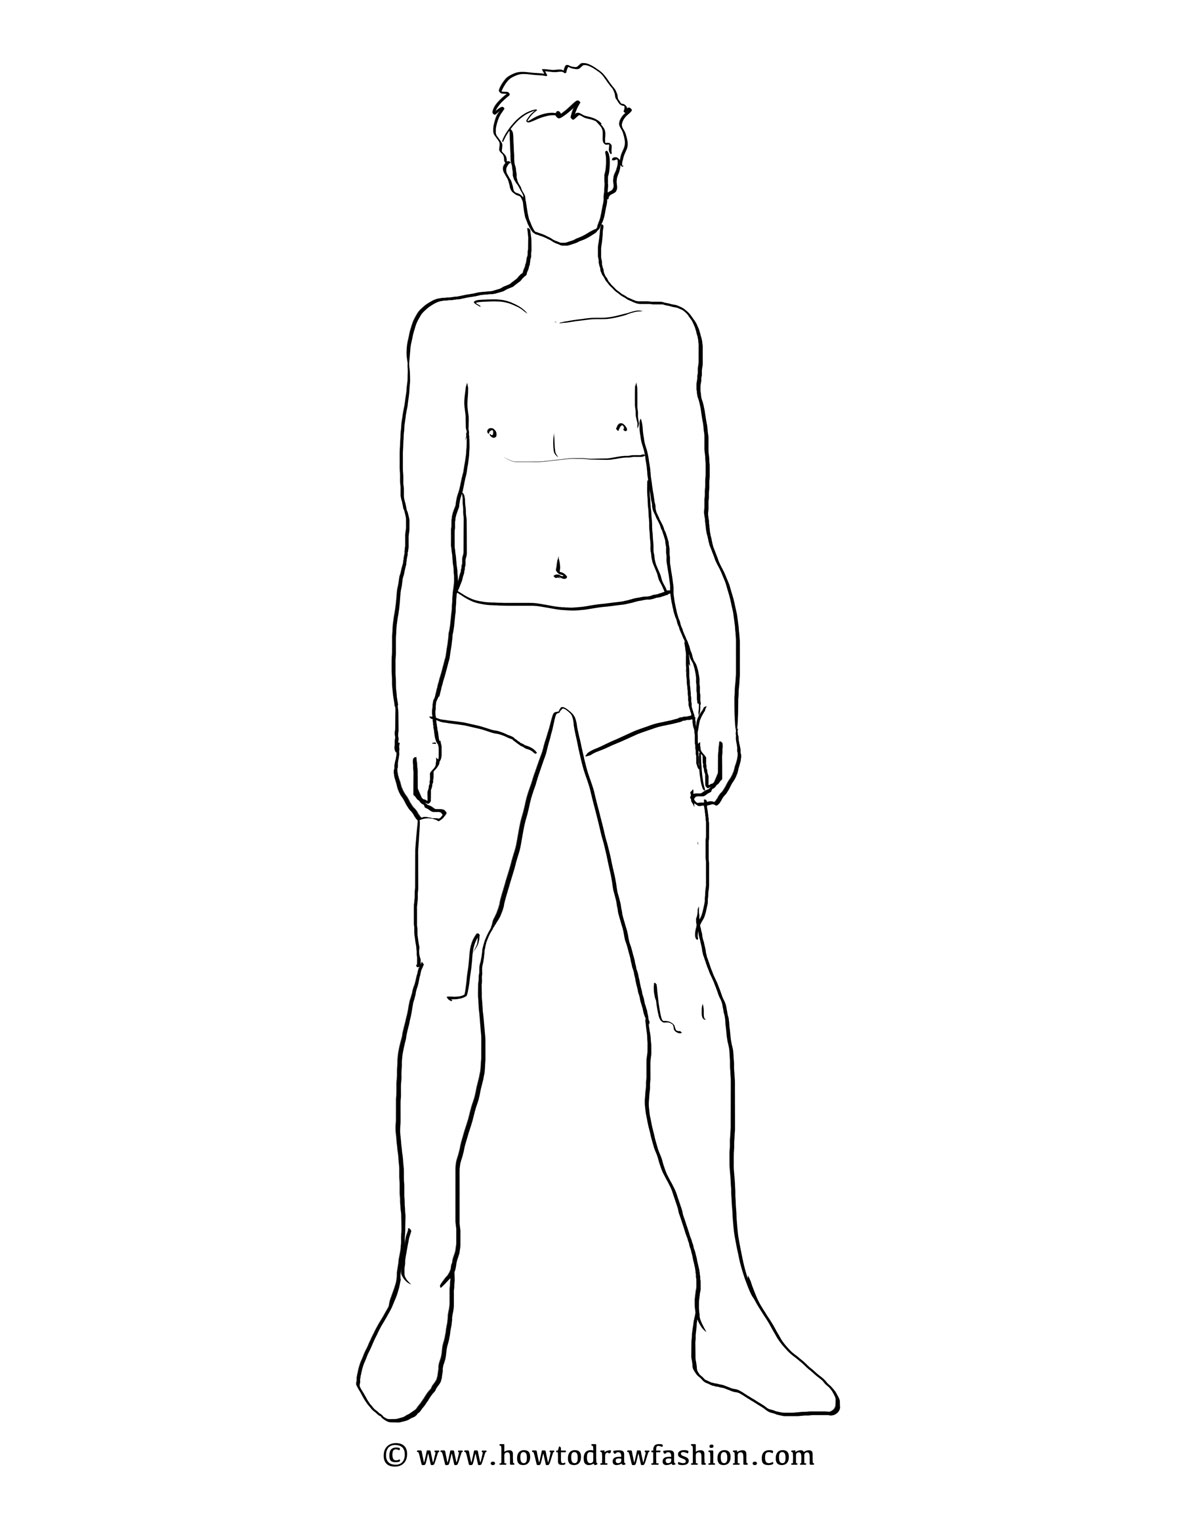 Male Body Drawing Template at Explore collection